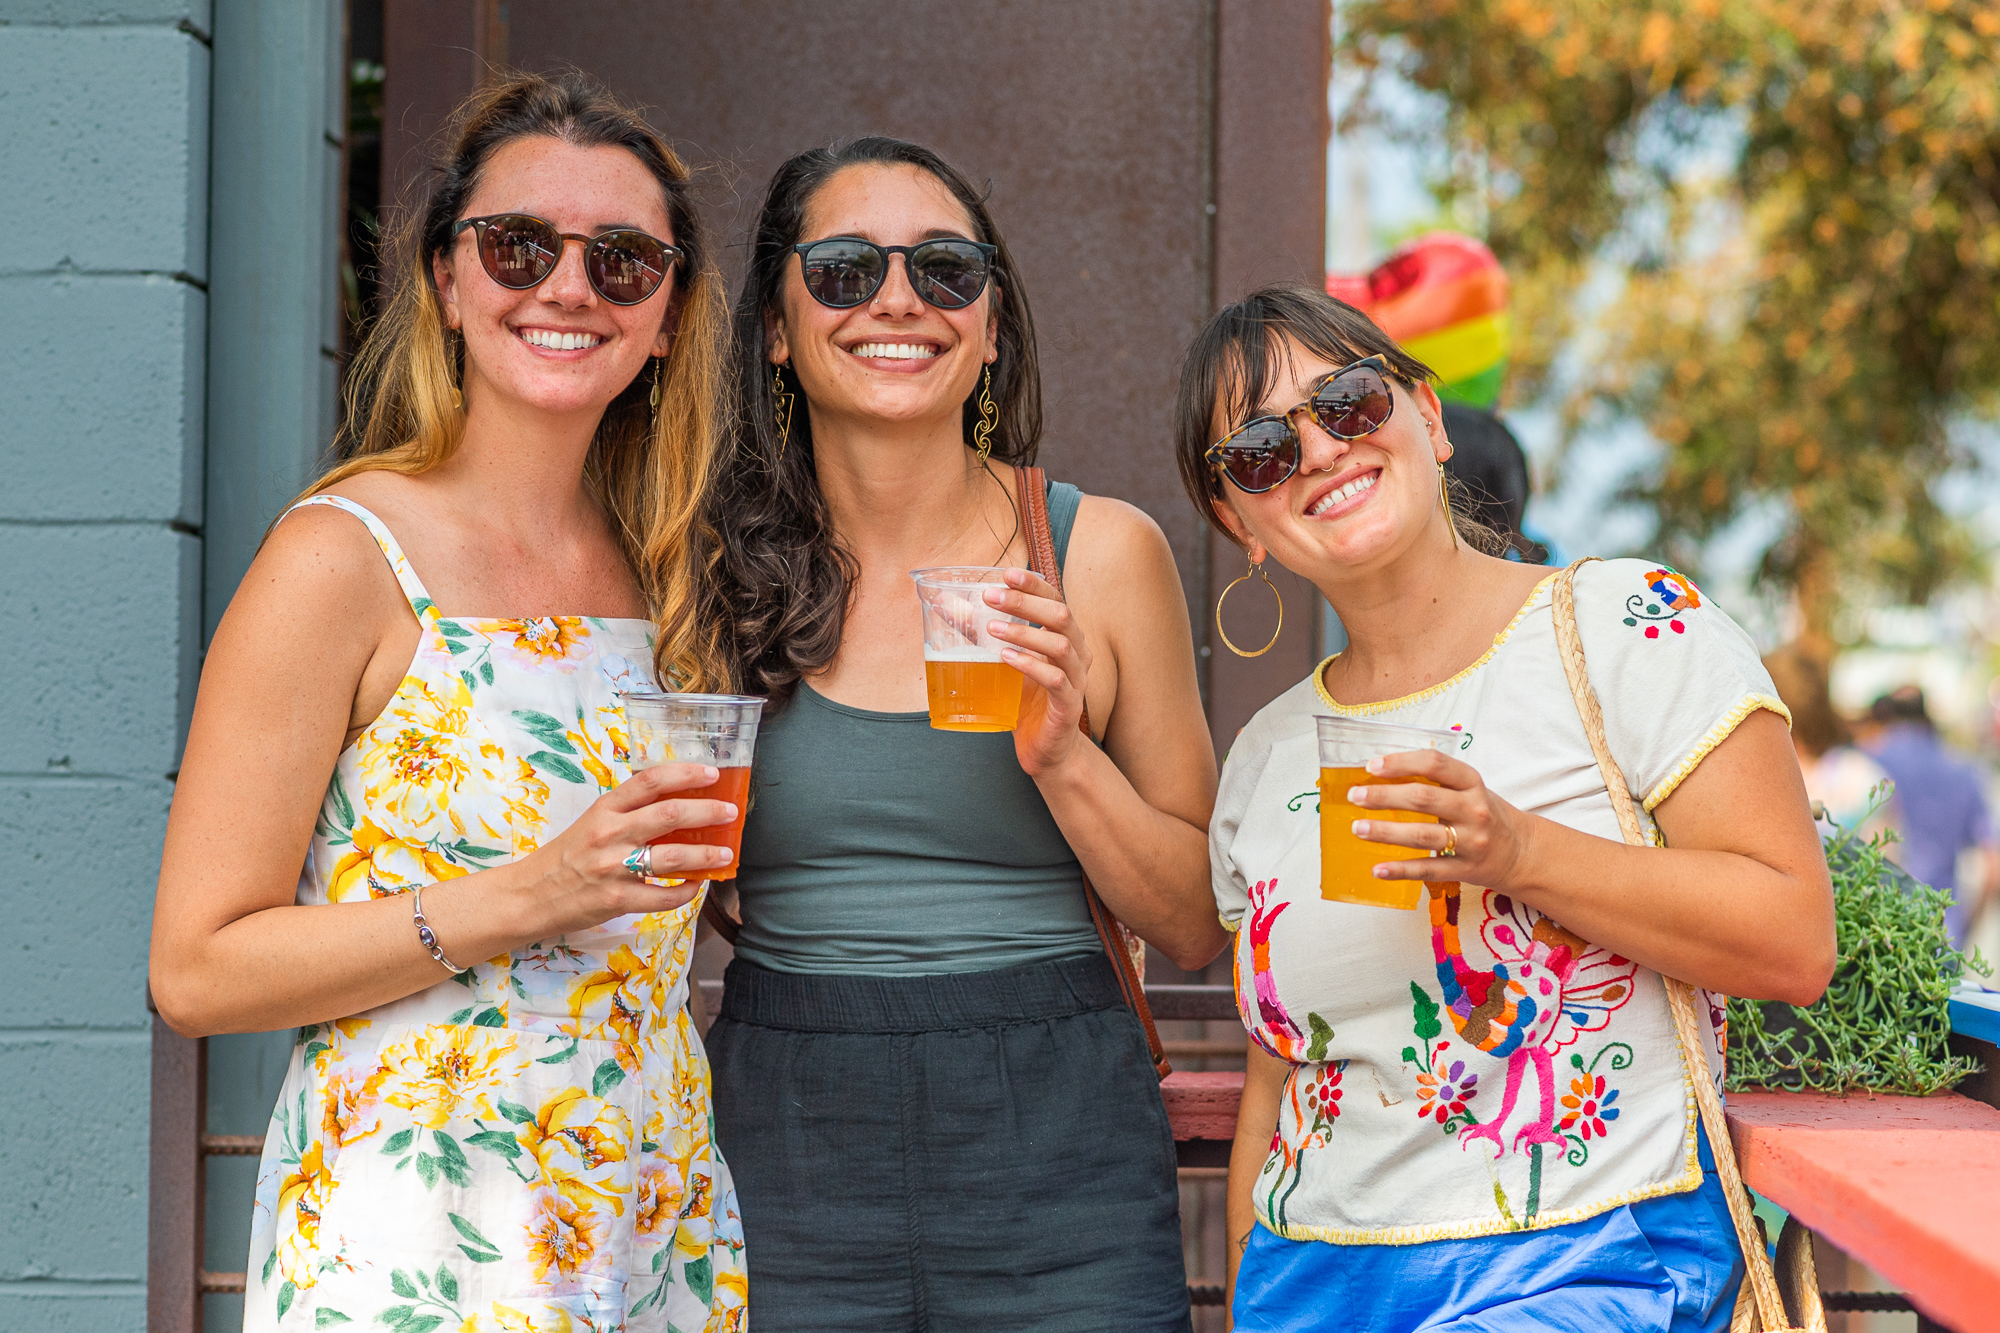 Group of people with sunglasses holding beers